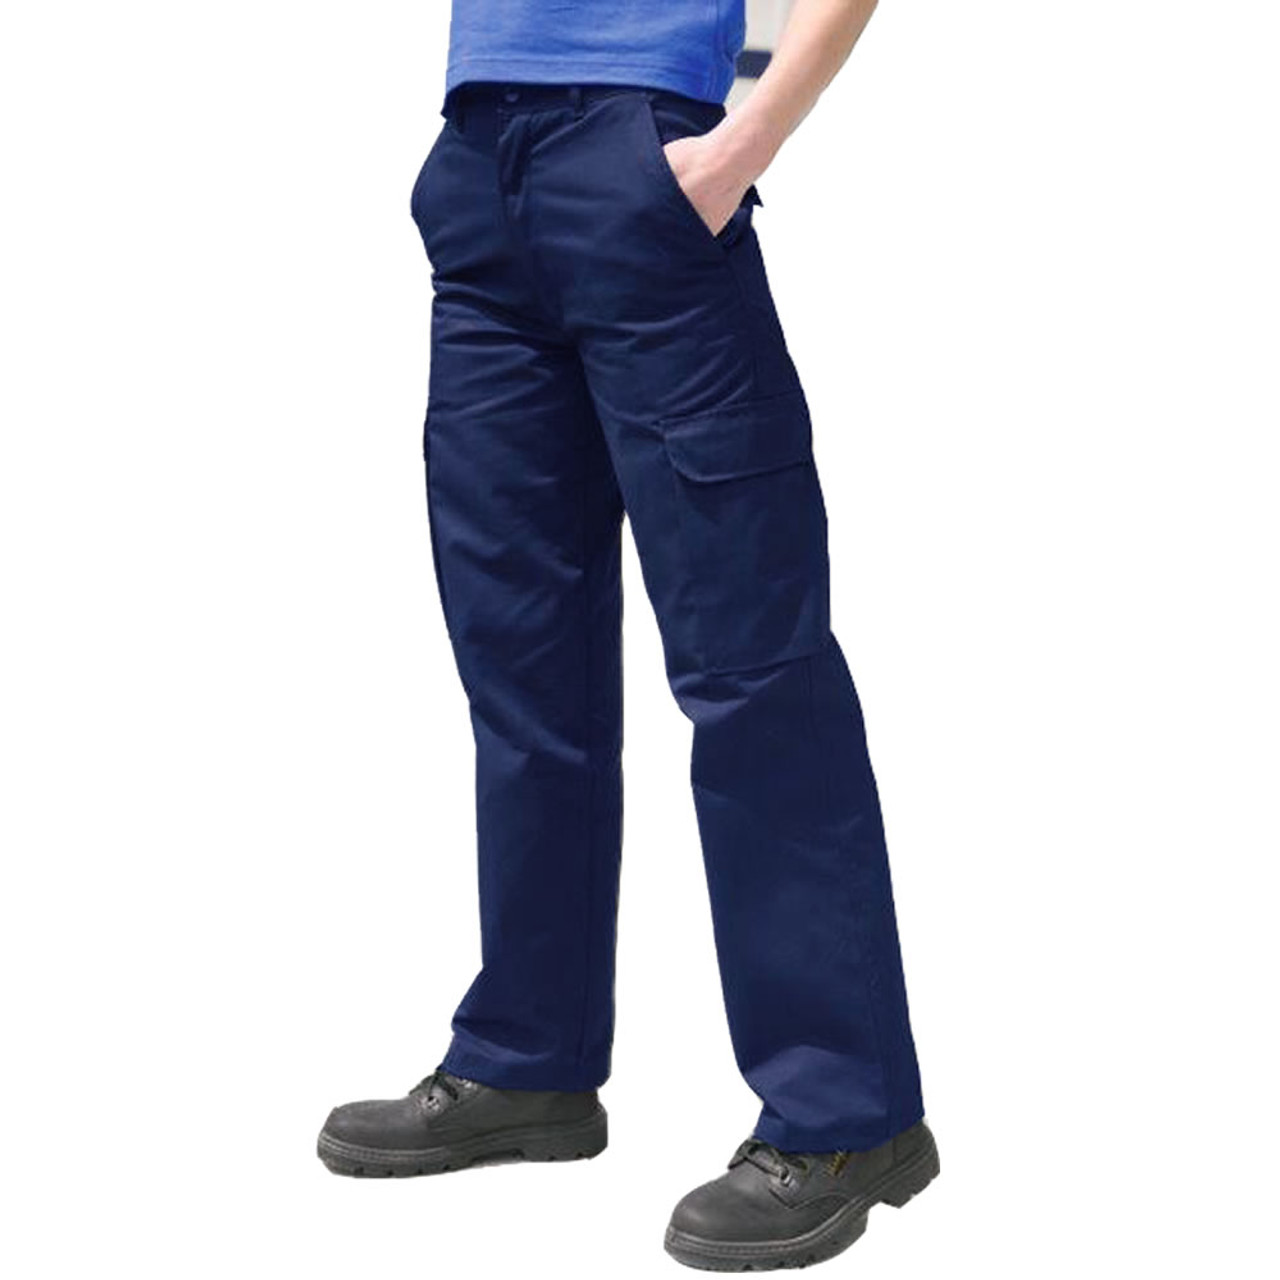 Ladies COMBAT CARGO Work Trousers Size 8 to 20 Short Reg Long in Black or  Navy